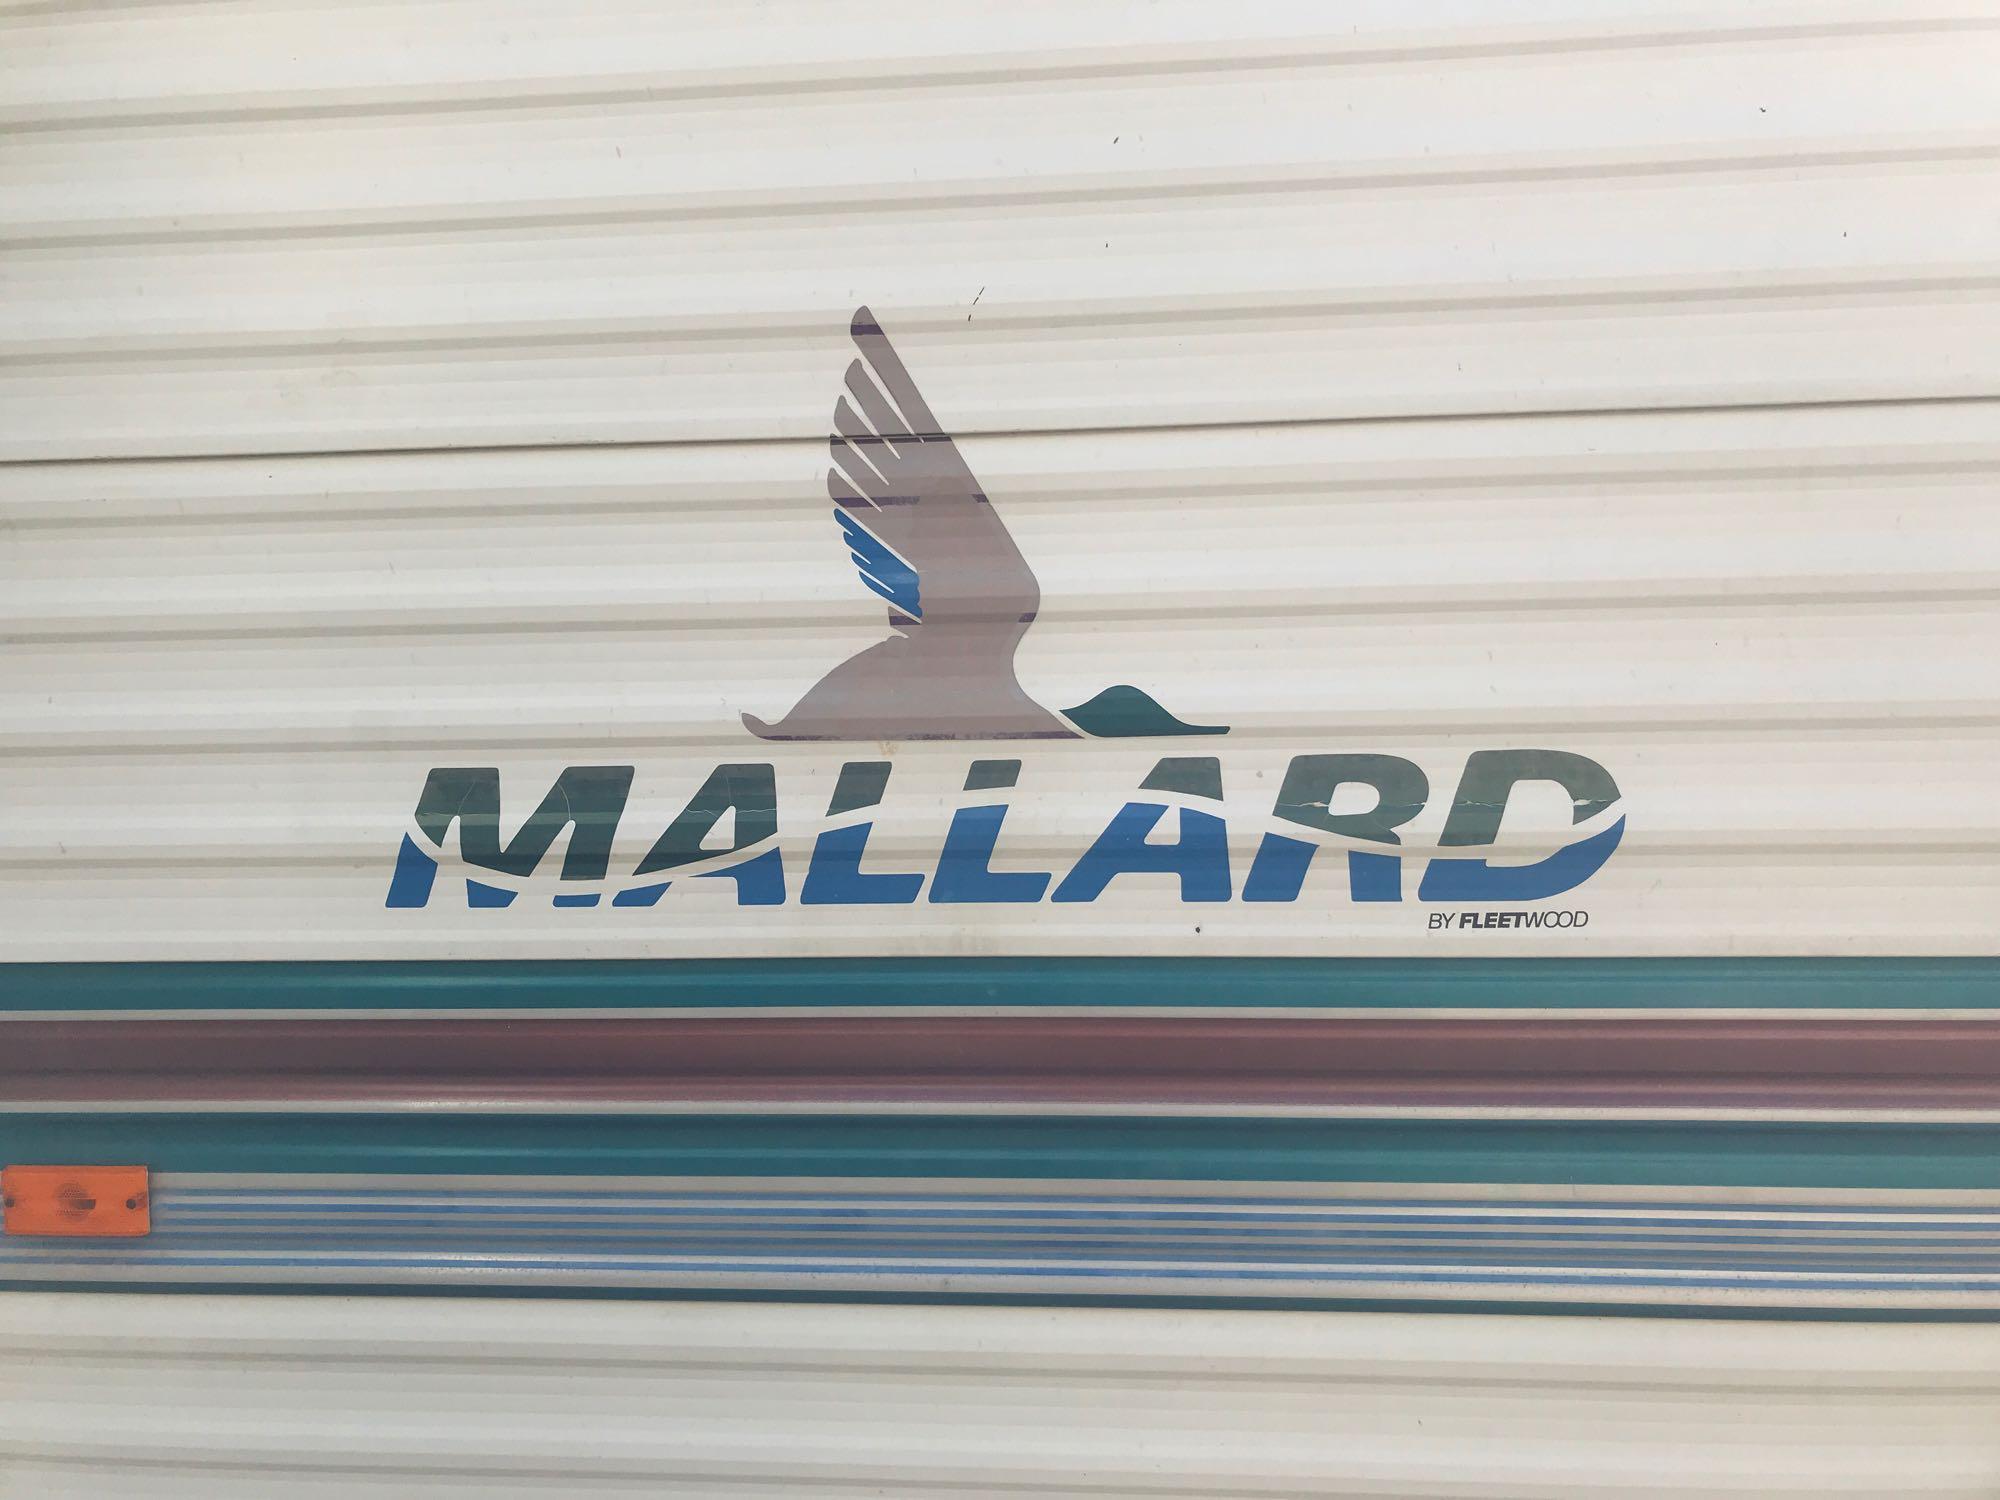 1997 Fleetwood Mallard 32ft. Travel Trailer with 8,300lbs G.V.W.R. with Living Room Slide Out